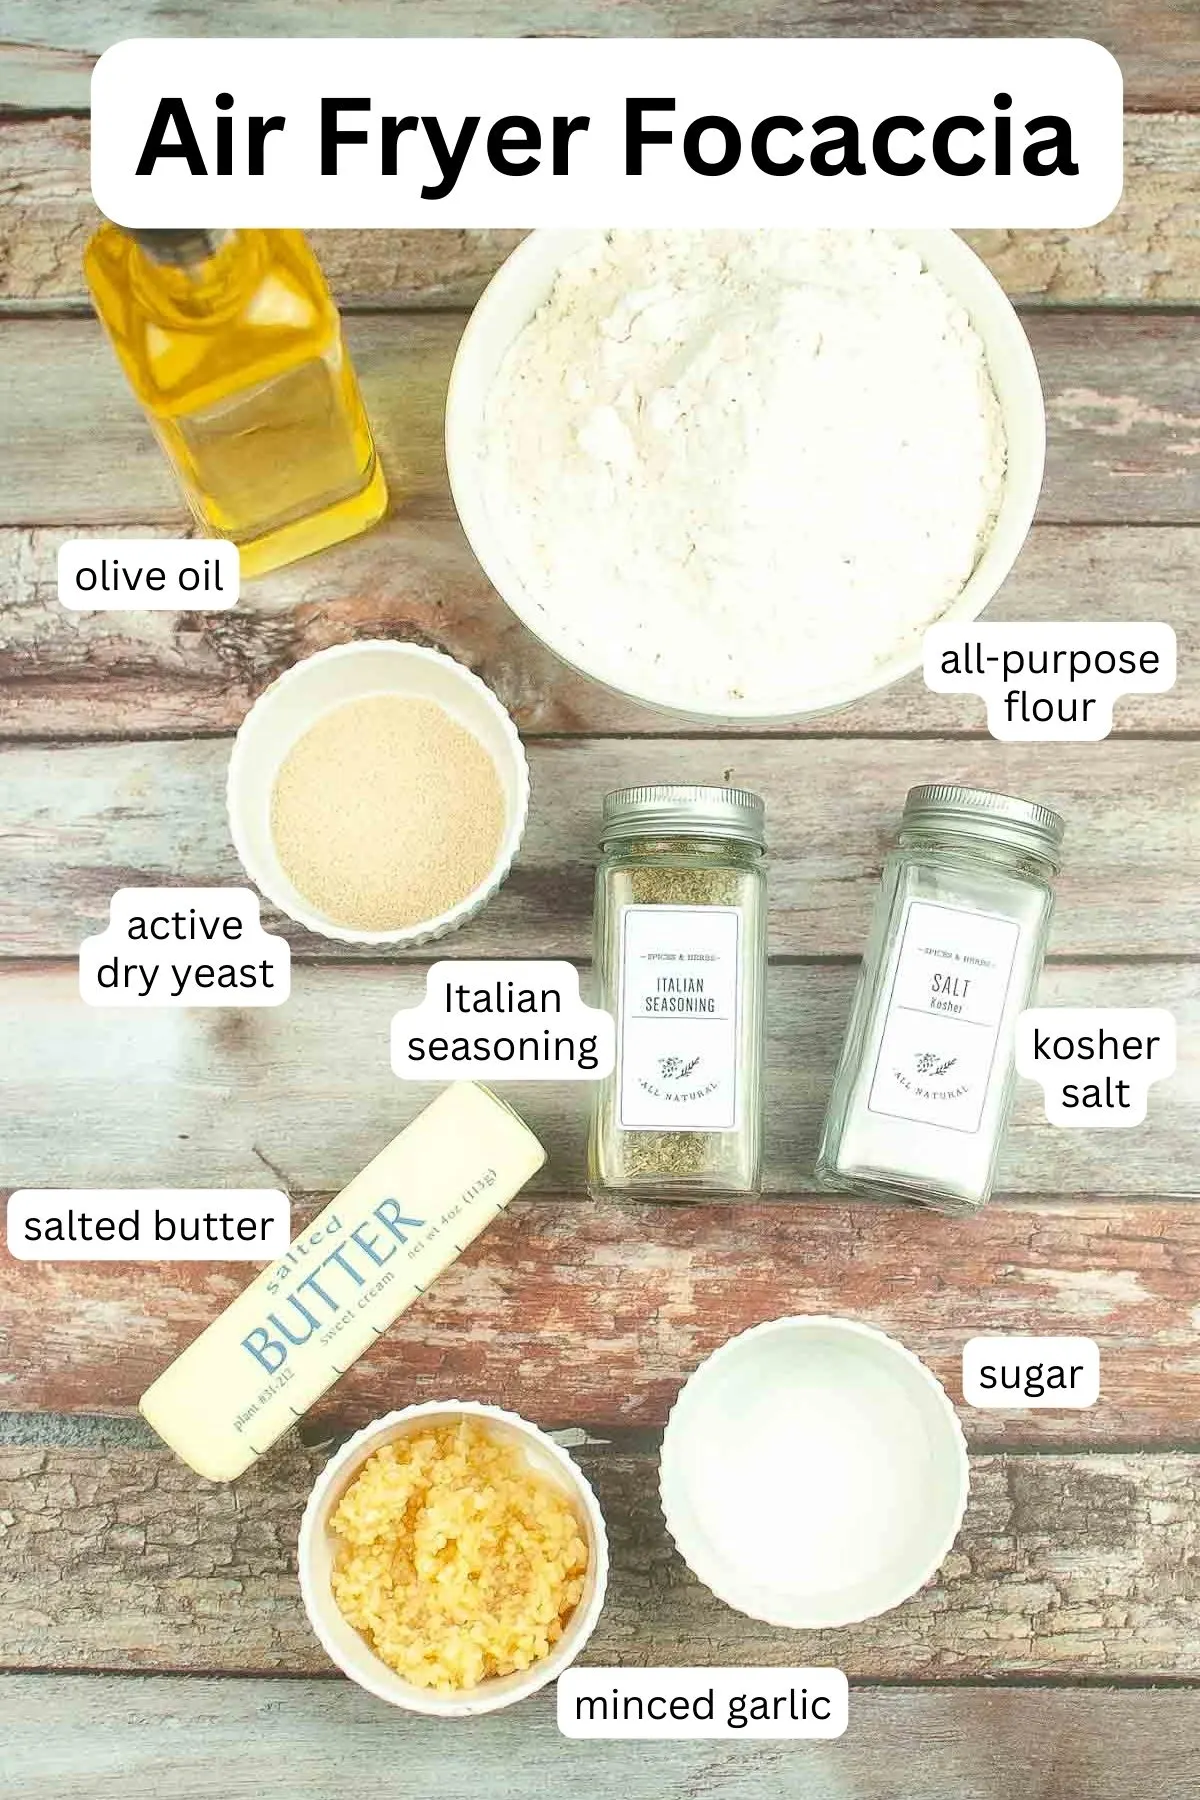 Ingredients to make a small focaccia loaf in the air fryer